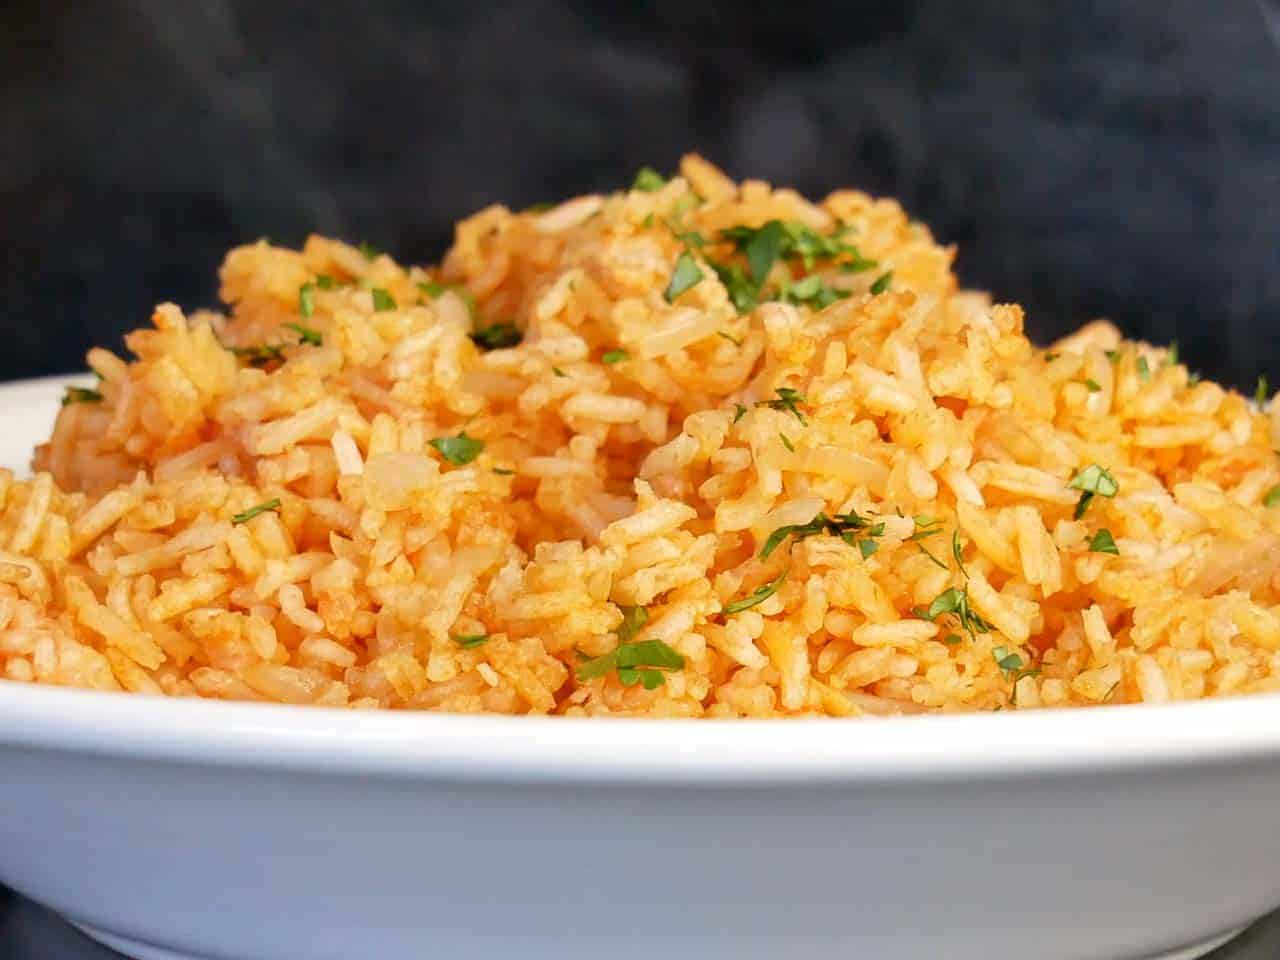 homemade restaurant style Mexican rice recipe sprinkles with fresh minced cilantro